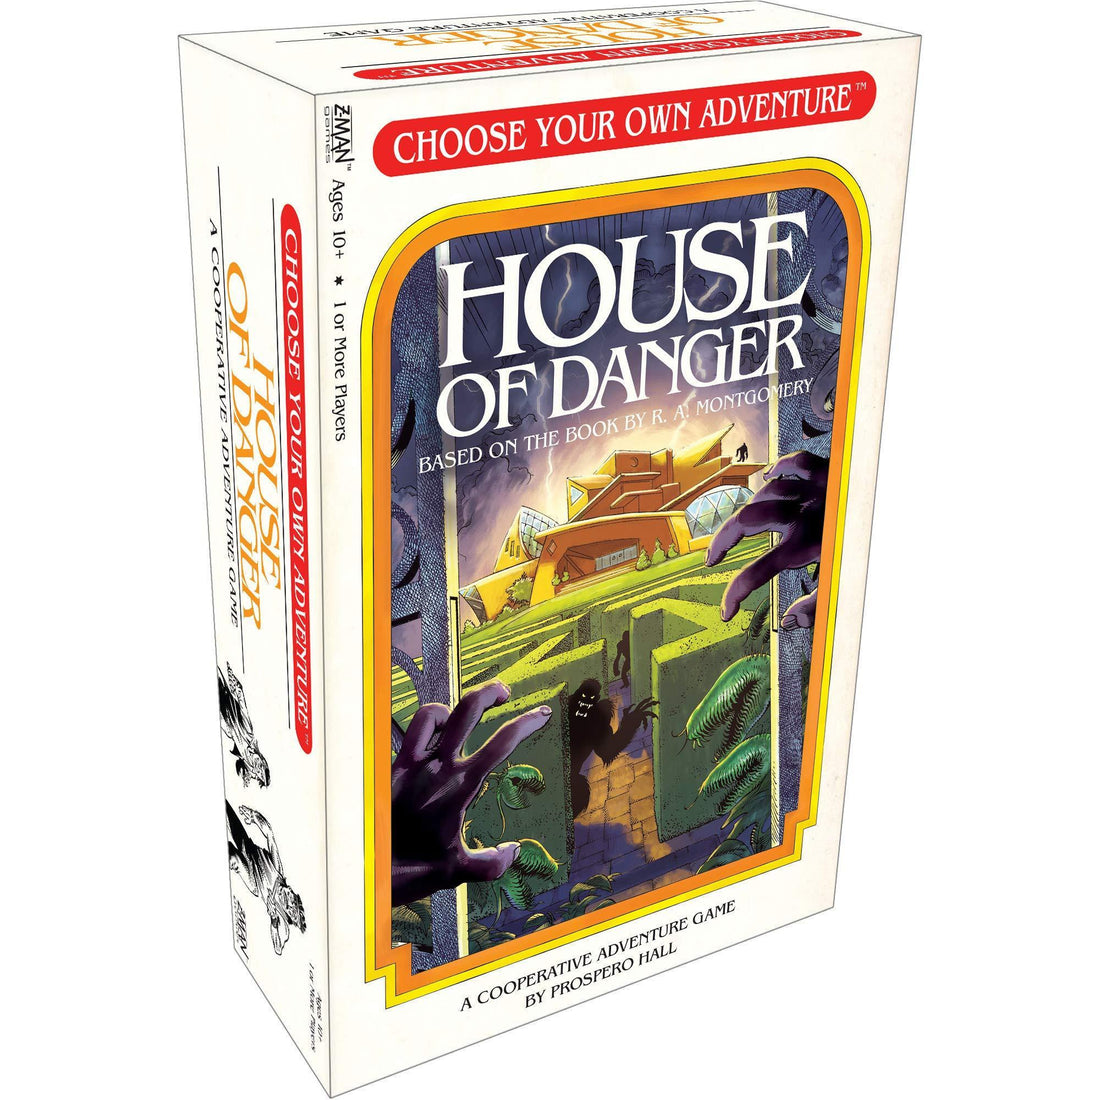 Choose Your Own Adventure: House of Danger - Kitty Hawk Kites Online Store